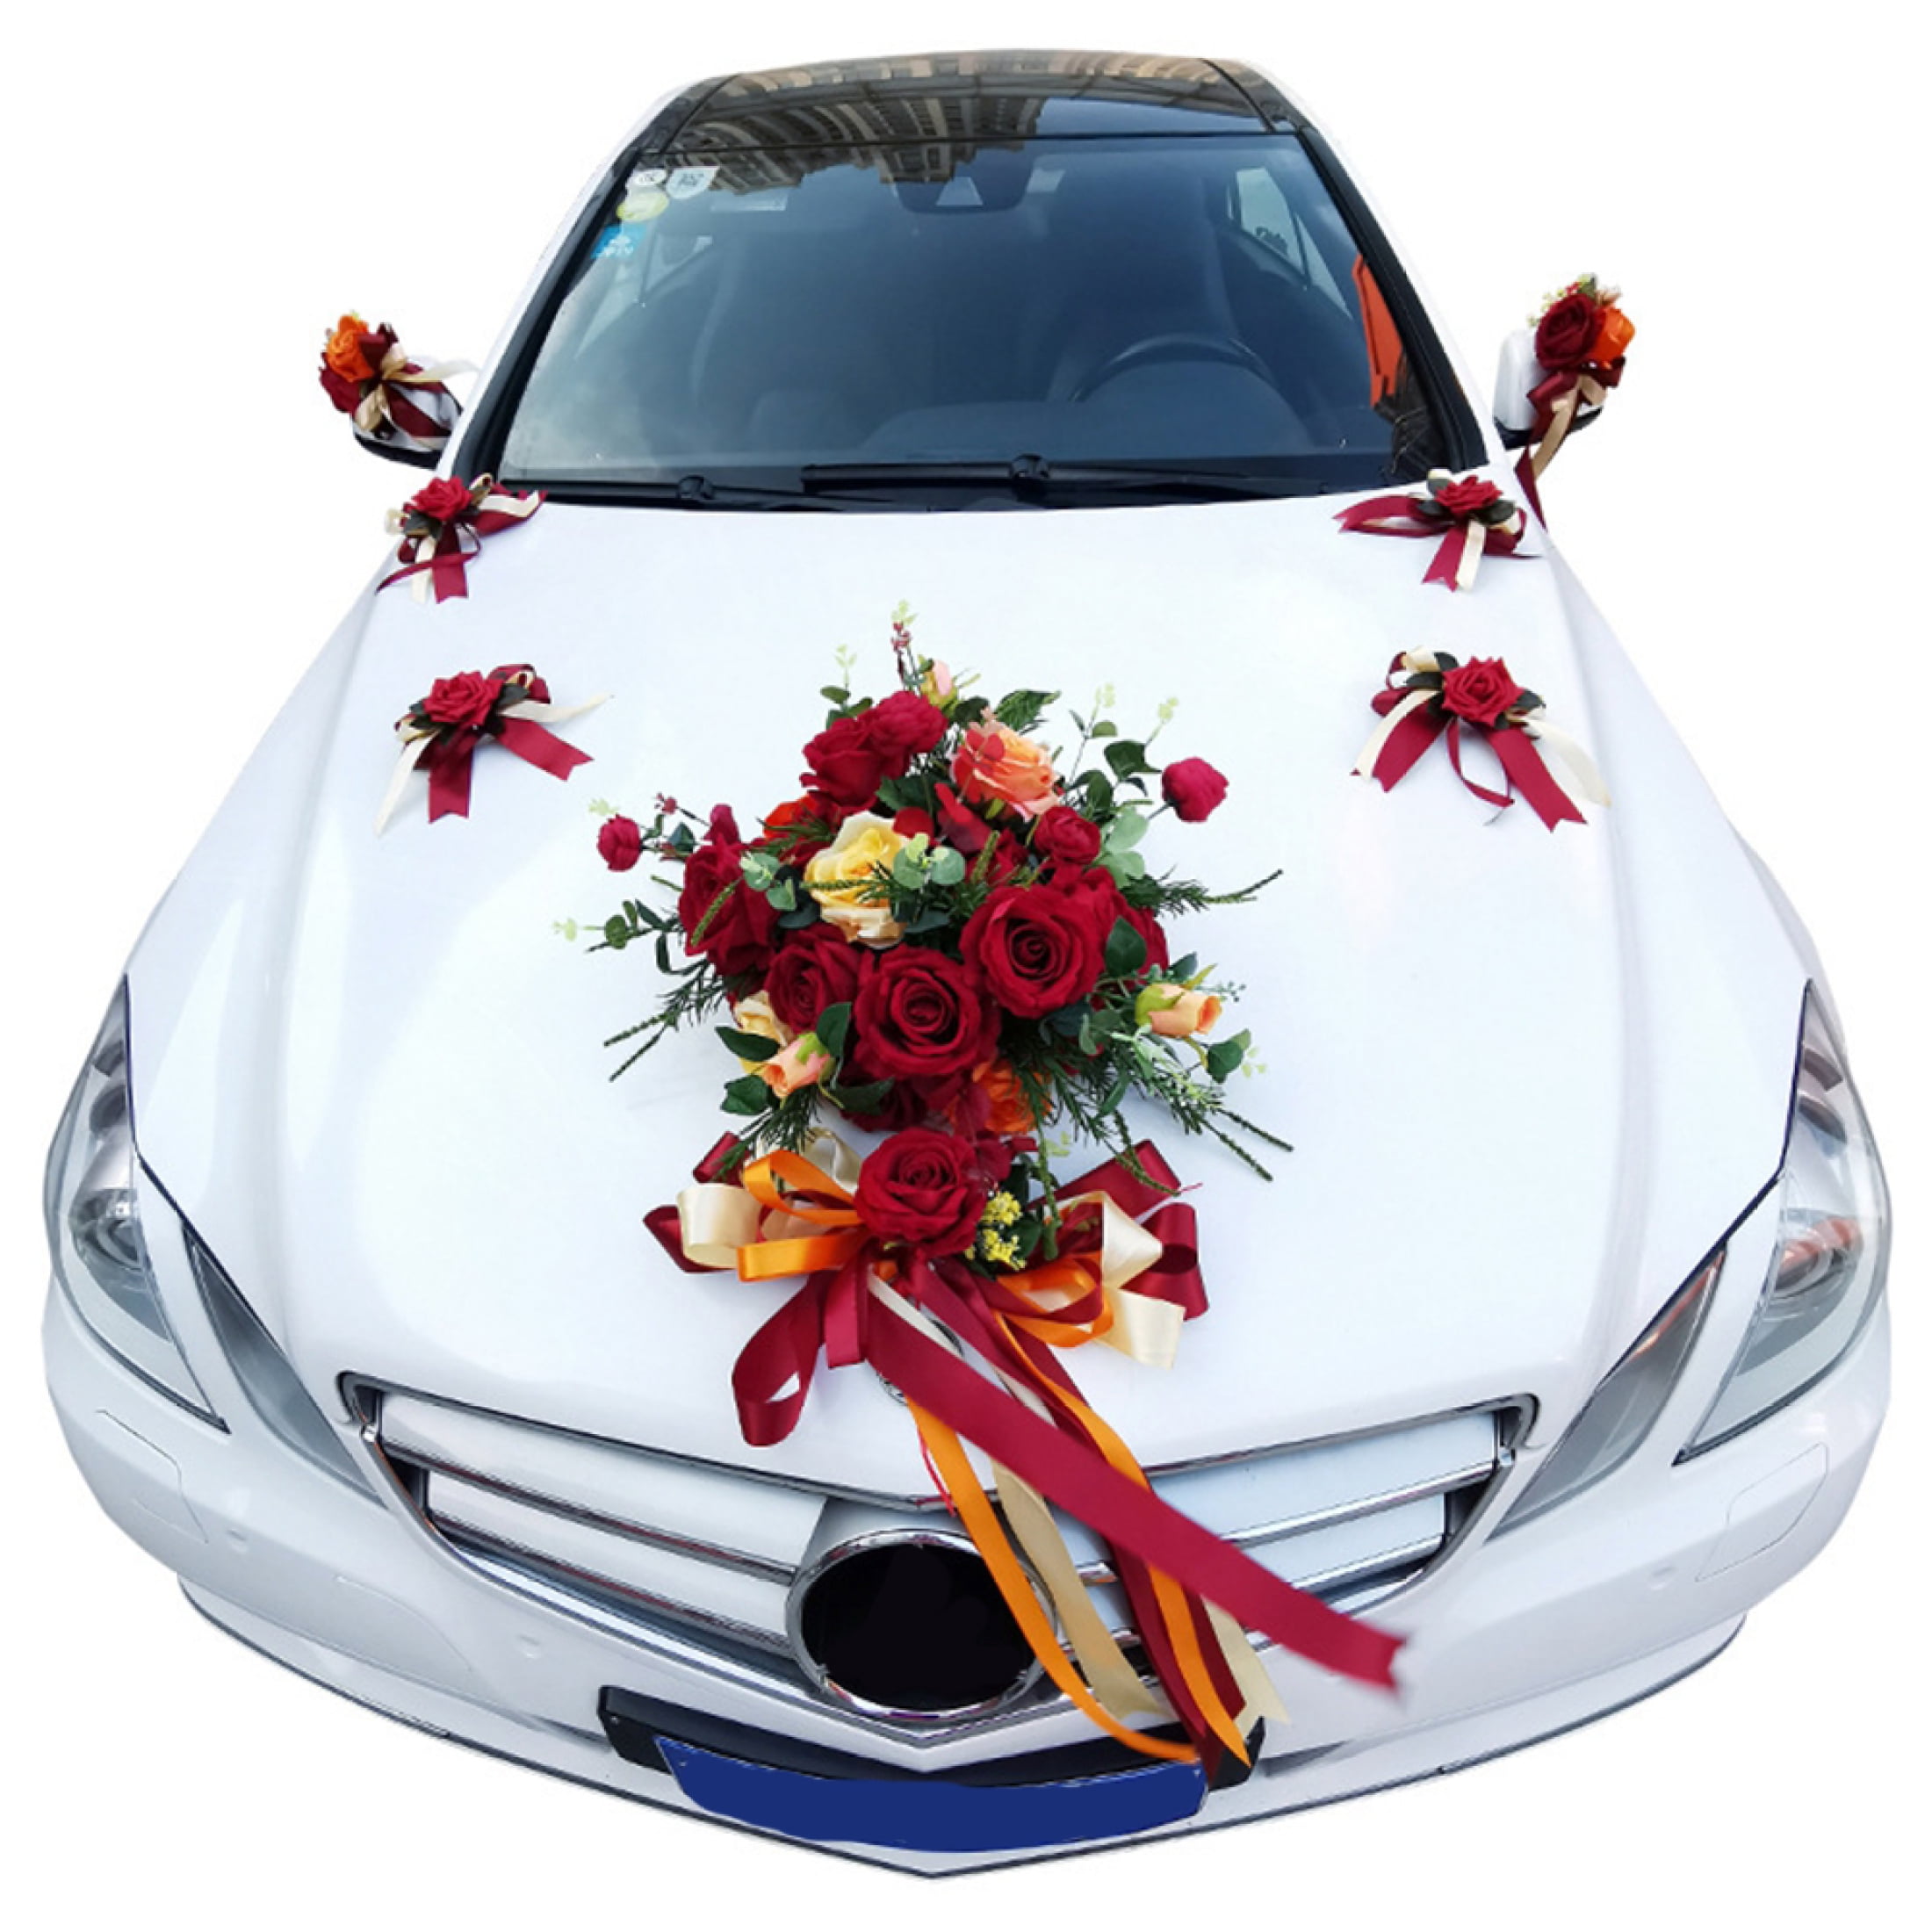 6,625 Car Rose Decoration Royalty-Free Photos and Stock Images